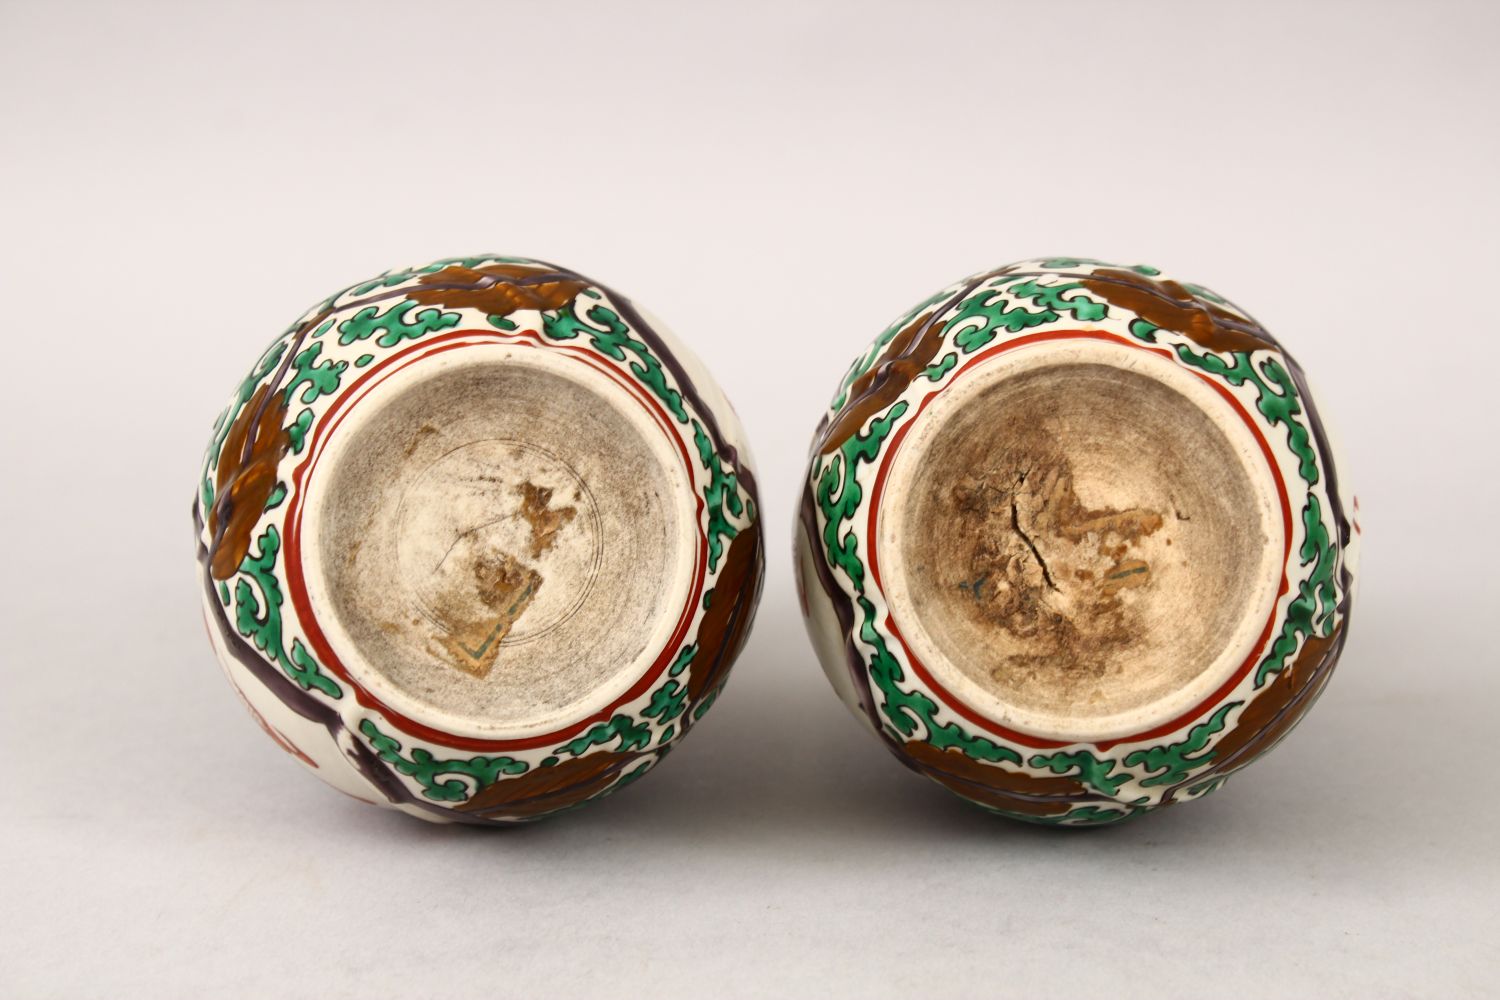 A PAIR OF 19TH CENTURY CHINESE FAMILLE ROSE / VERTE PORCELAIN DOUBLE GOURD SHAPED VASES, 18CM HIGH. - Image 3 of 3